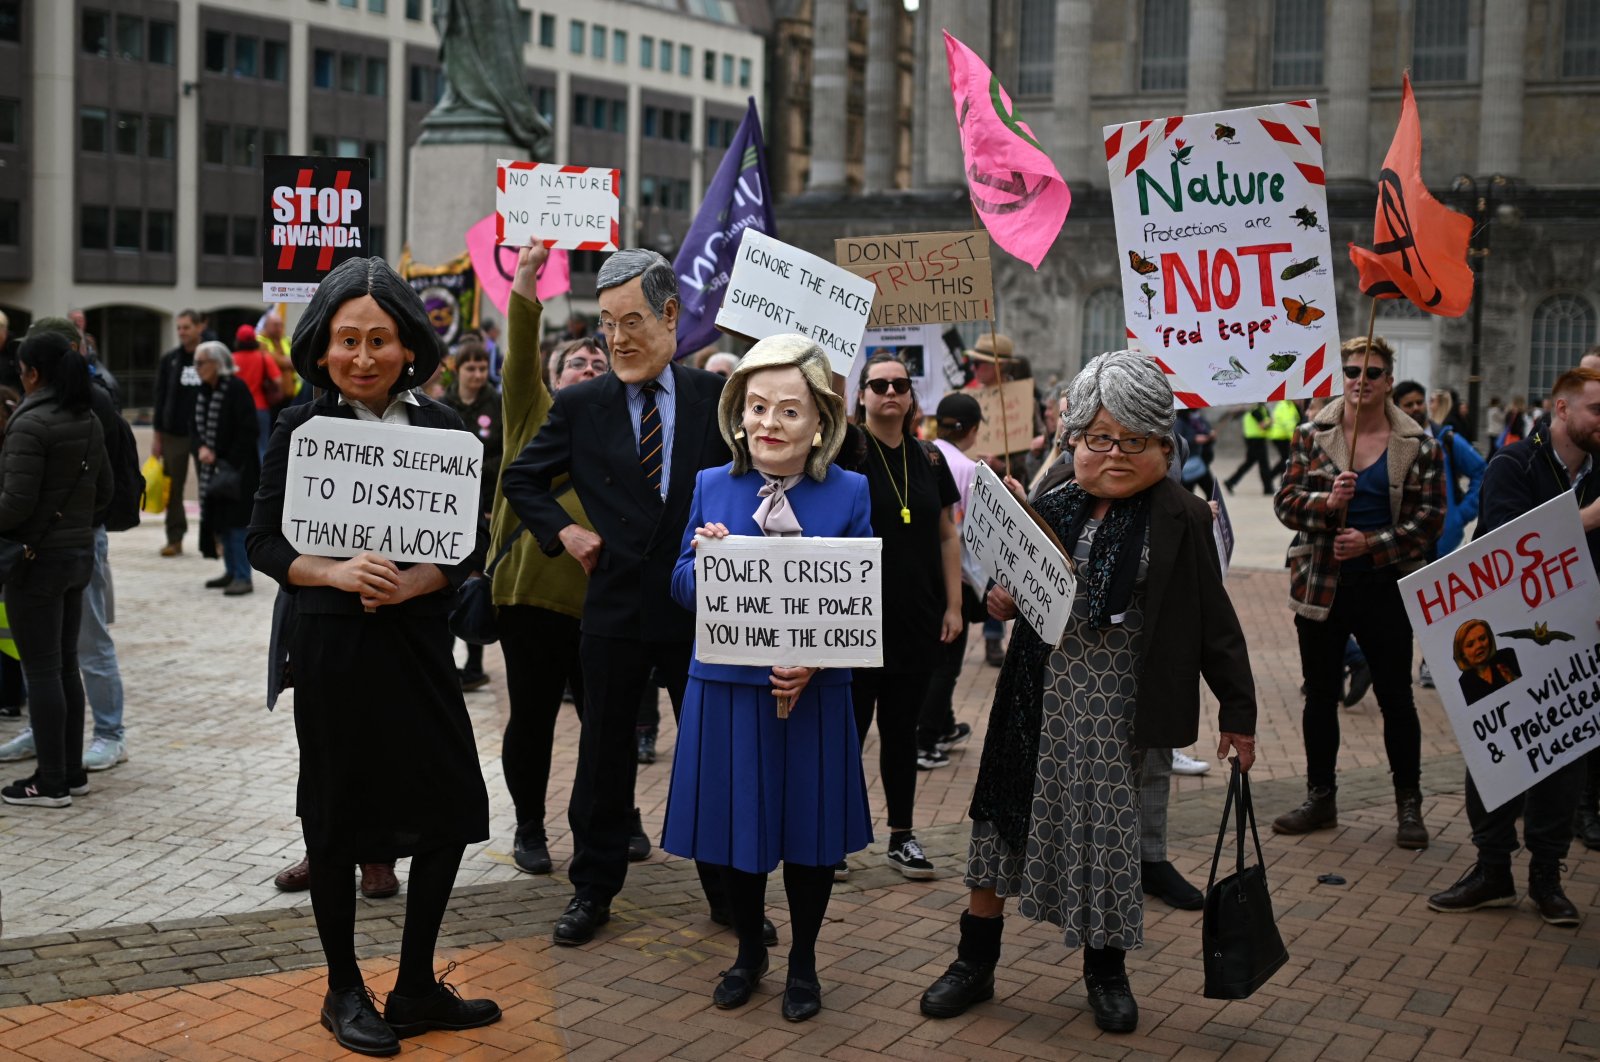 Protesters dressed like (L-R) Suella Braverman, Jacob Rees-Mogg, Liz Truss and Therese Coffey hold up placards at an anti-government protest in Victoria Square, Birmingham, central England, Oct. 2, 2022. (AFP Photo)